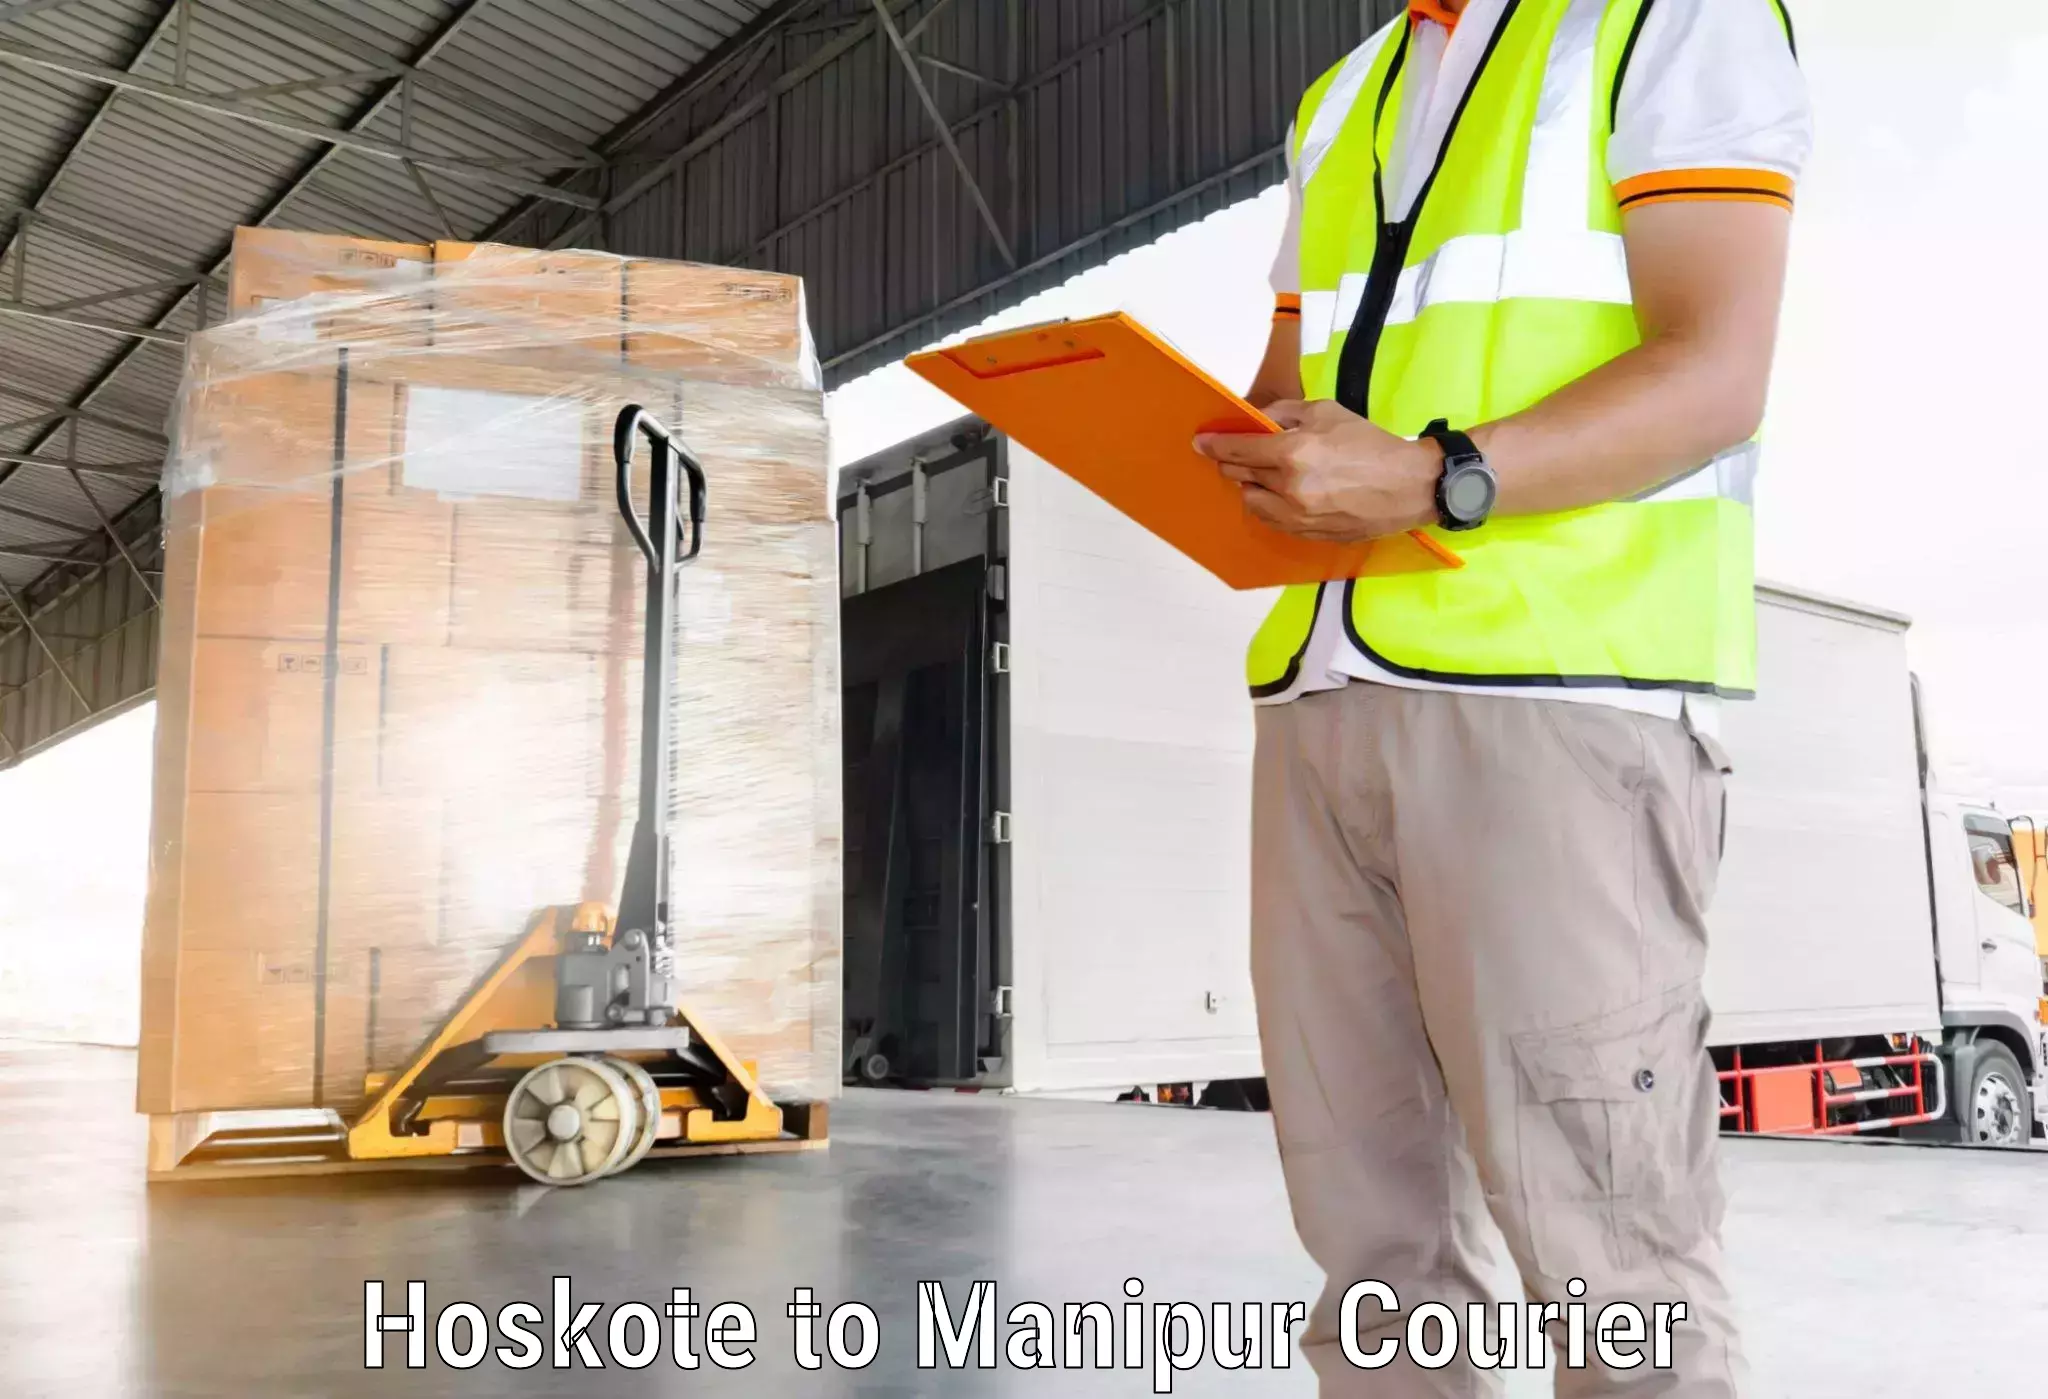 International courier networks Hoskote to Manipur